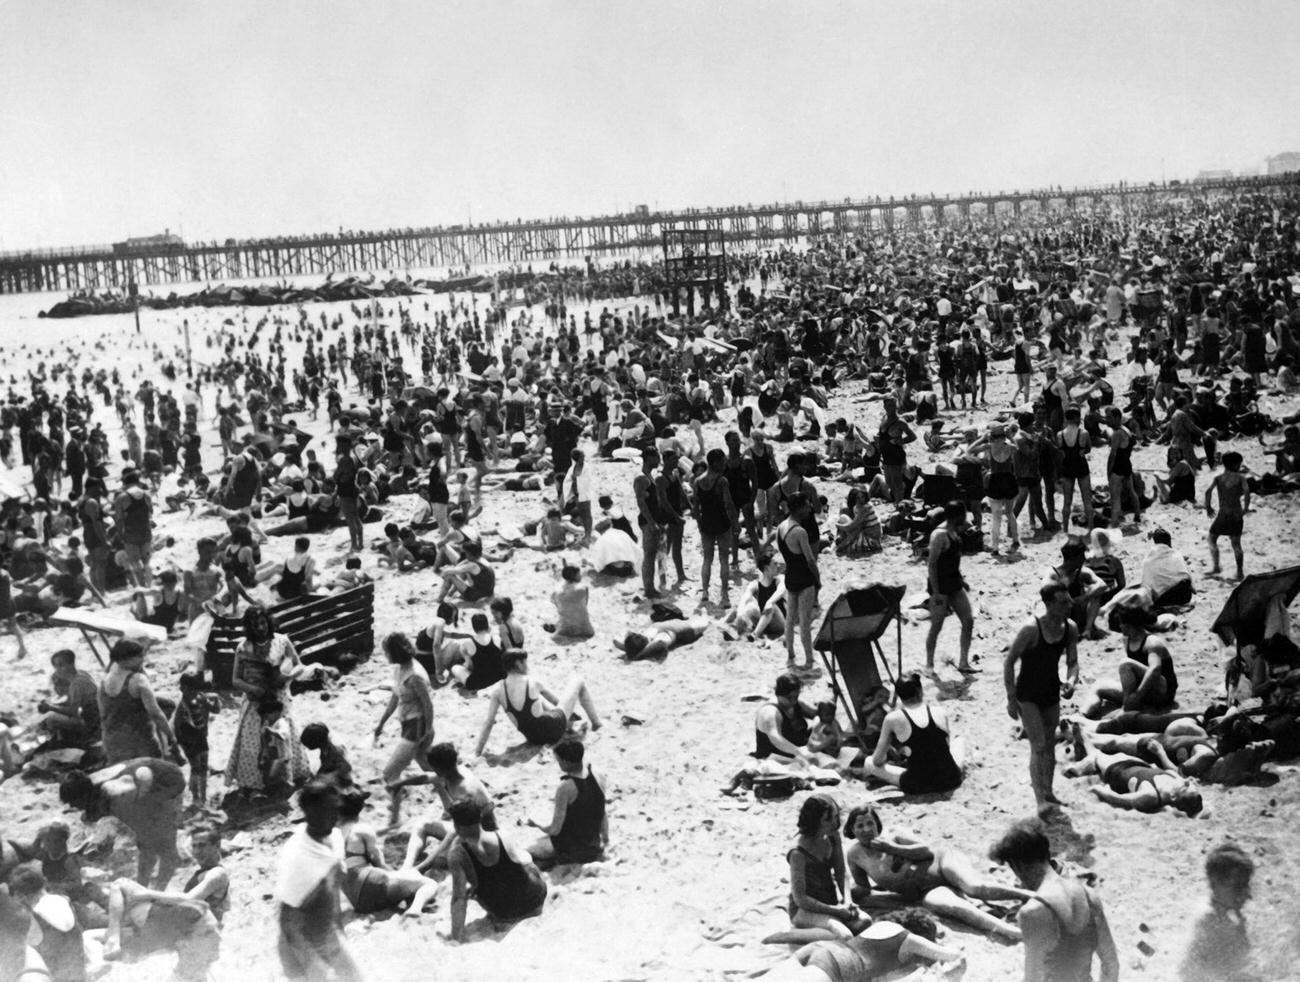 Coney Island Beach Packed During Heatwave, July 16, 1931